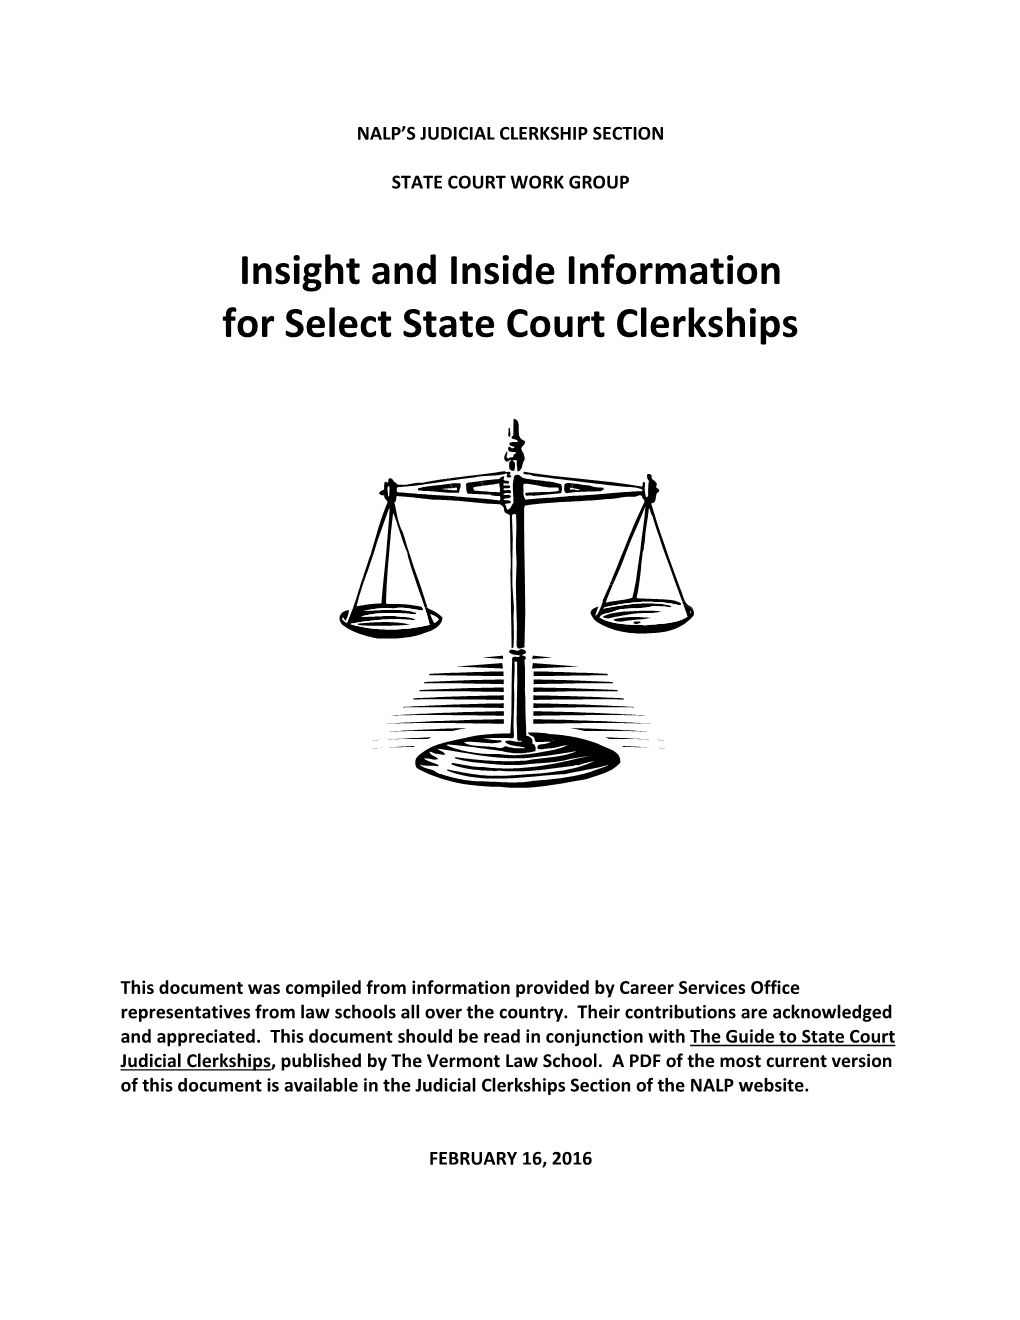 NALP Insight and Inside Information for Select State Court Clerkships